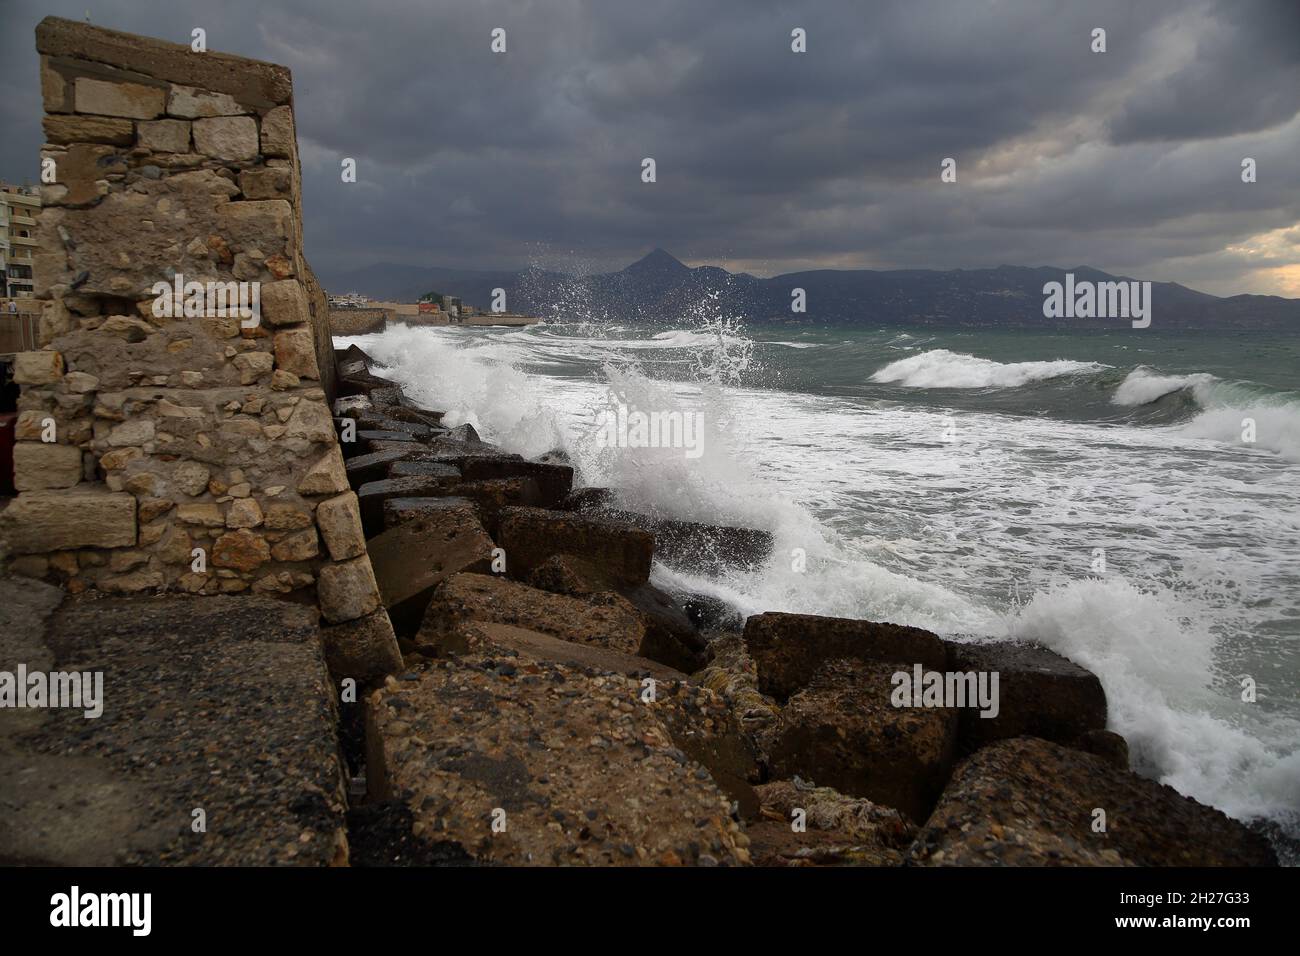 Storm in the sea, waves crash on rocky shore, grey heavy clouds Stock Photo